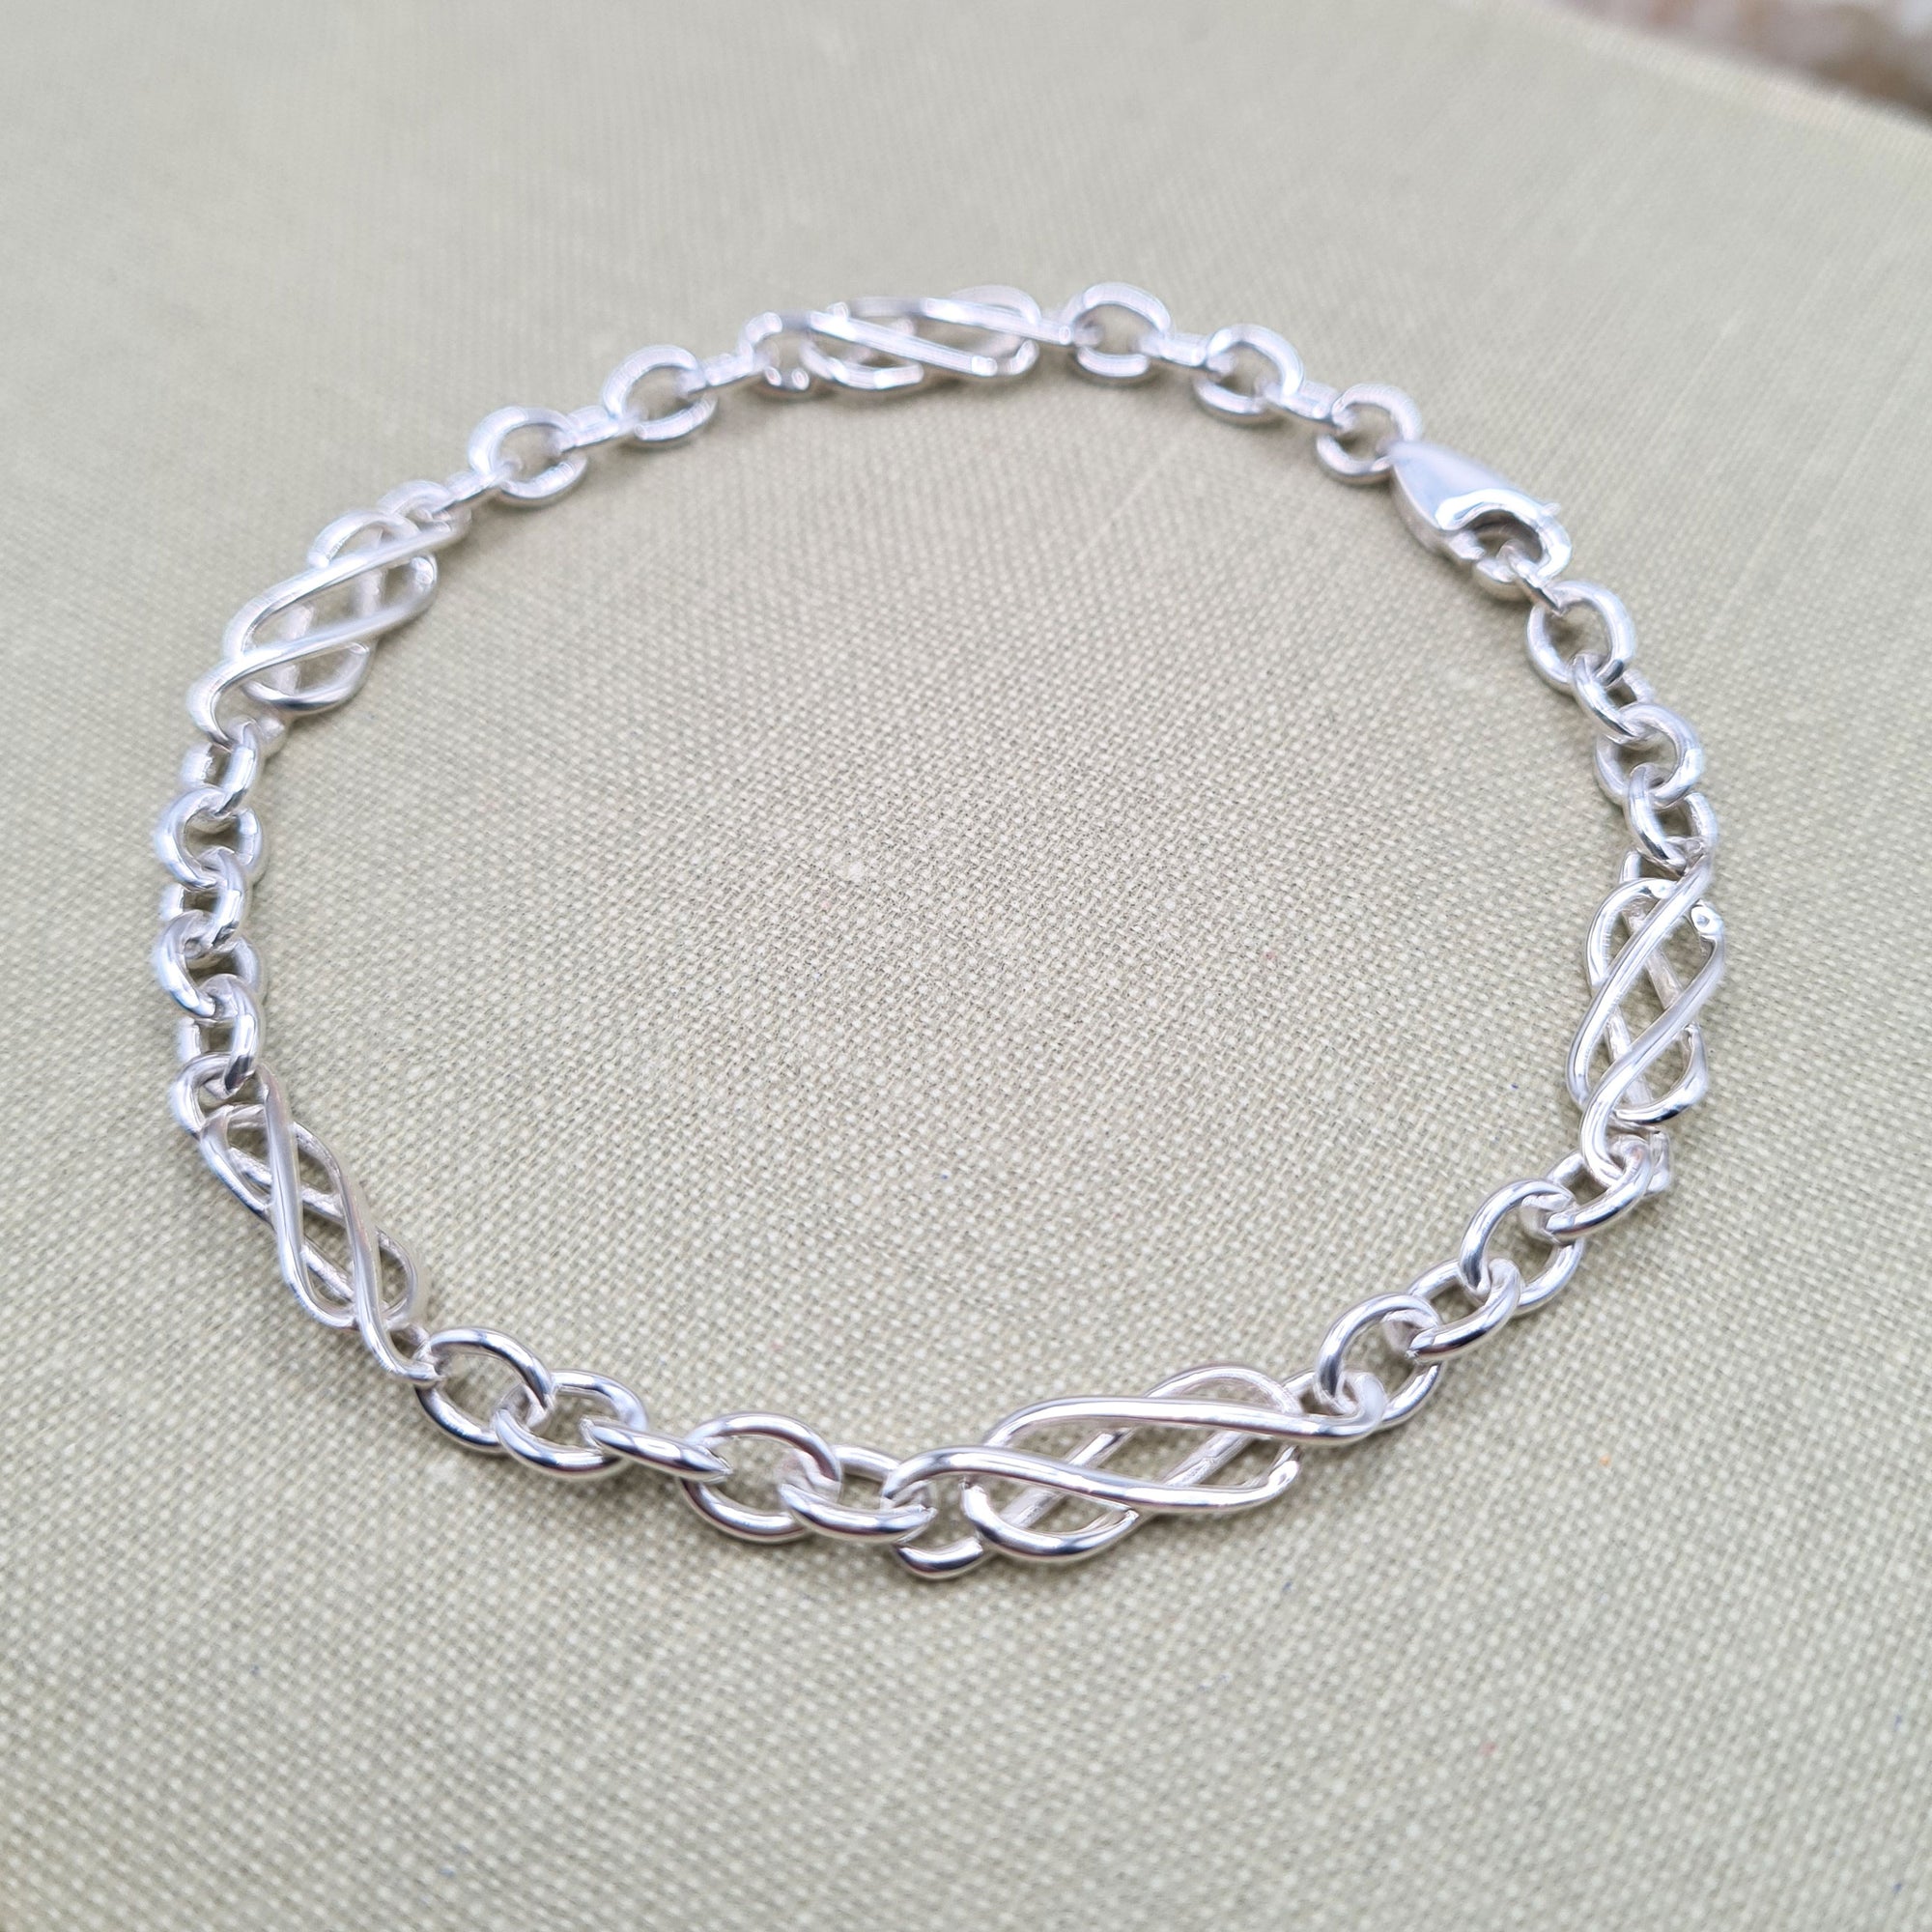 Solid 925 Sterling Silver Bracelets for Ladies, Free UK Delivery Jewellery  Gift | eBay